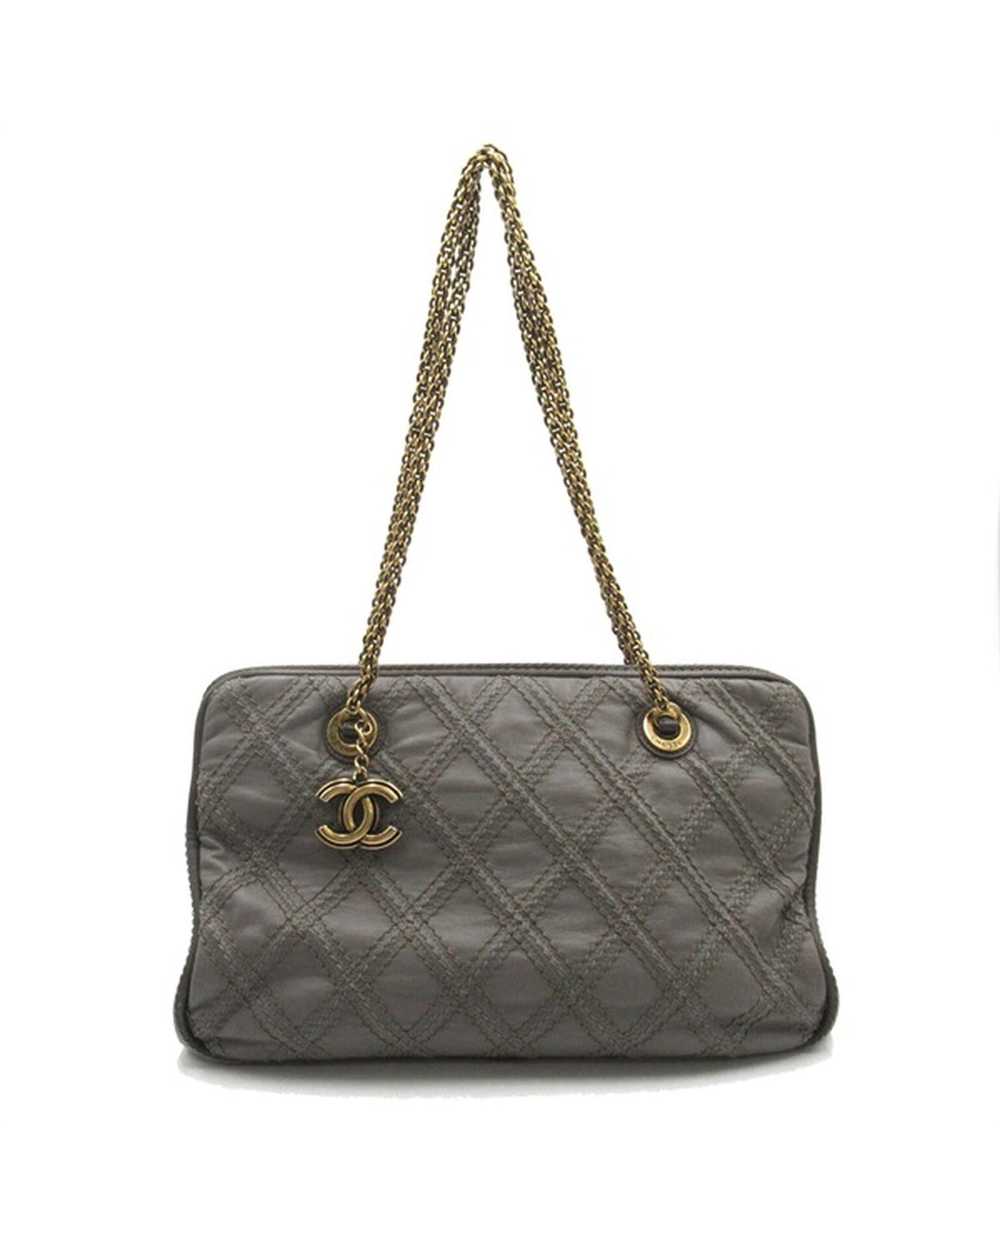 Chanel Quilted Leather Triptych Tote Bag - Grey - image 1